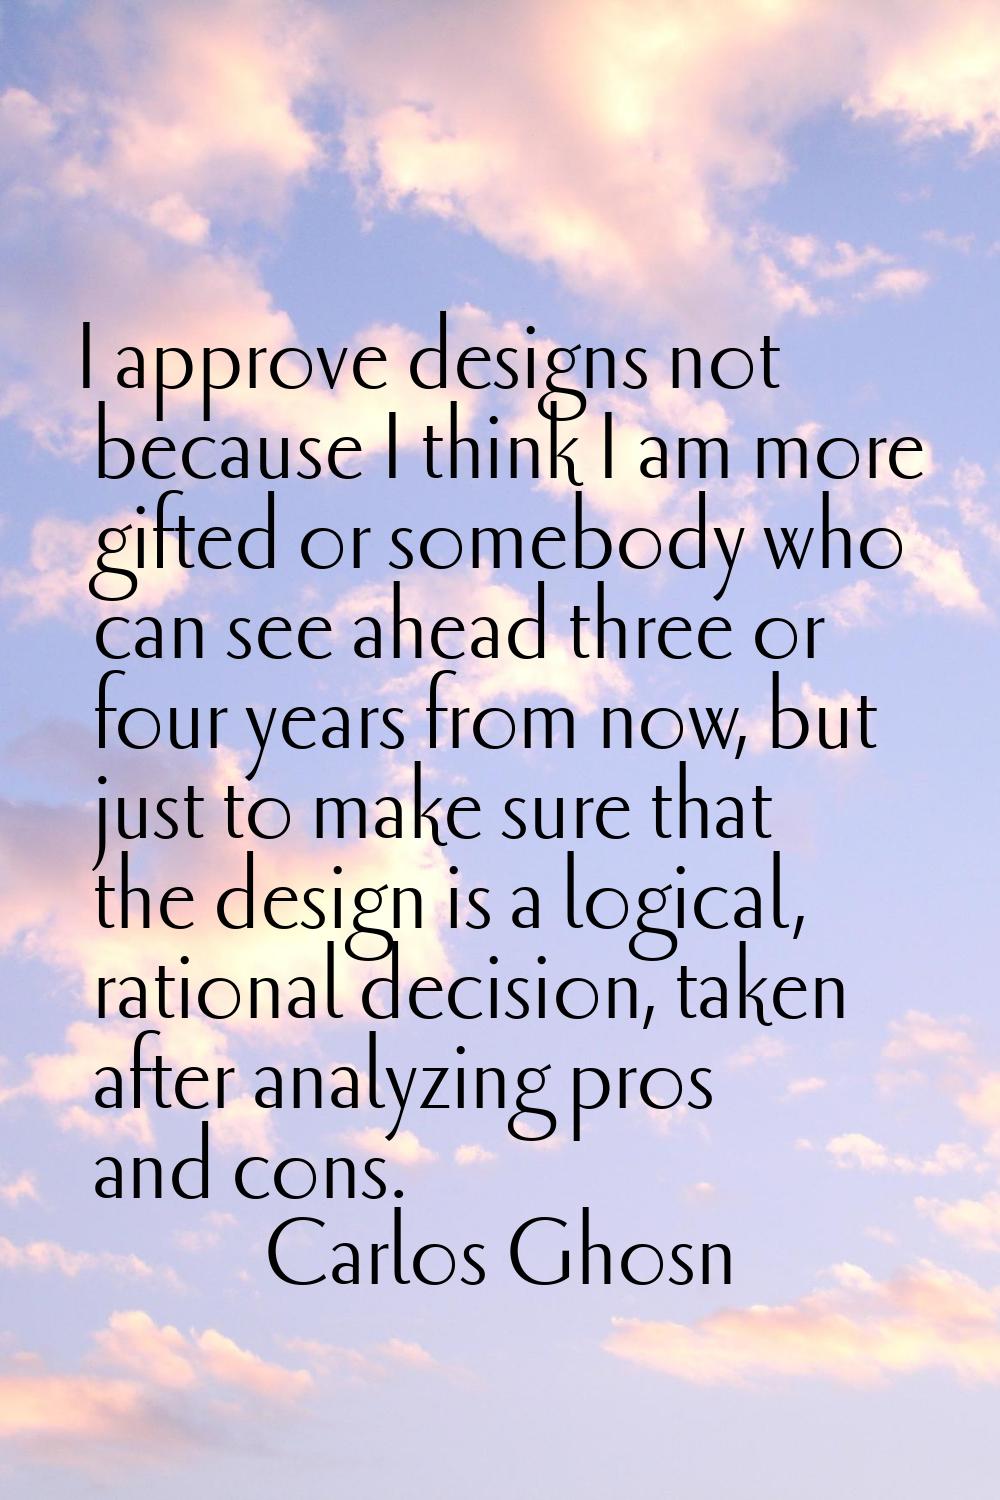 I approve designs not because I think I am more gifted or somebody who can see ahead three or four 